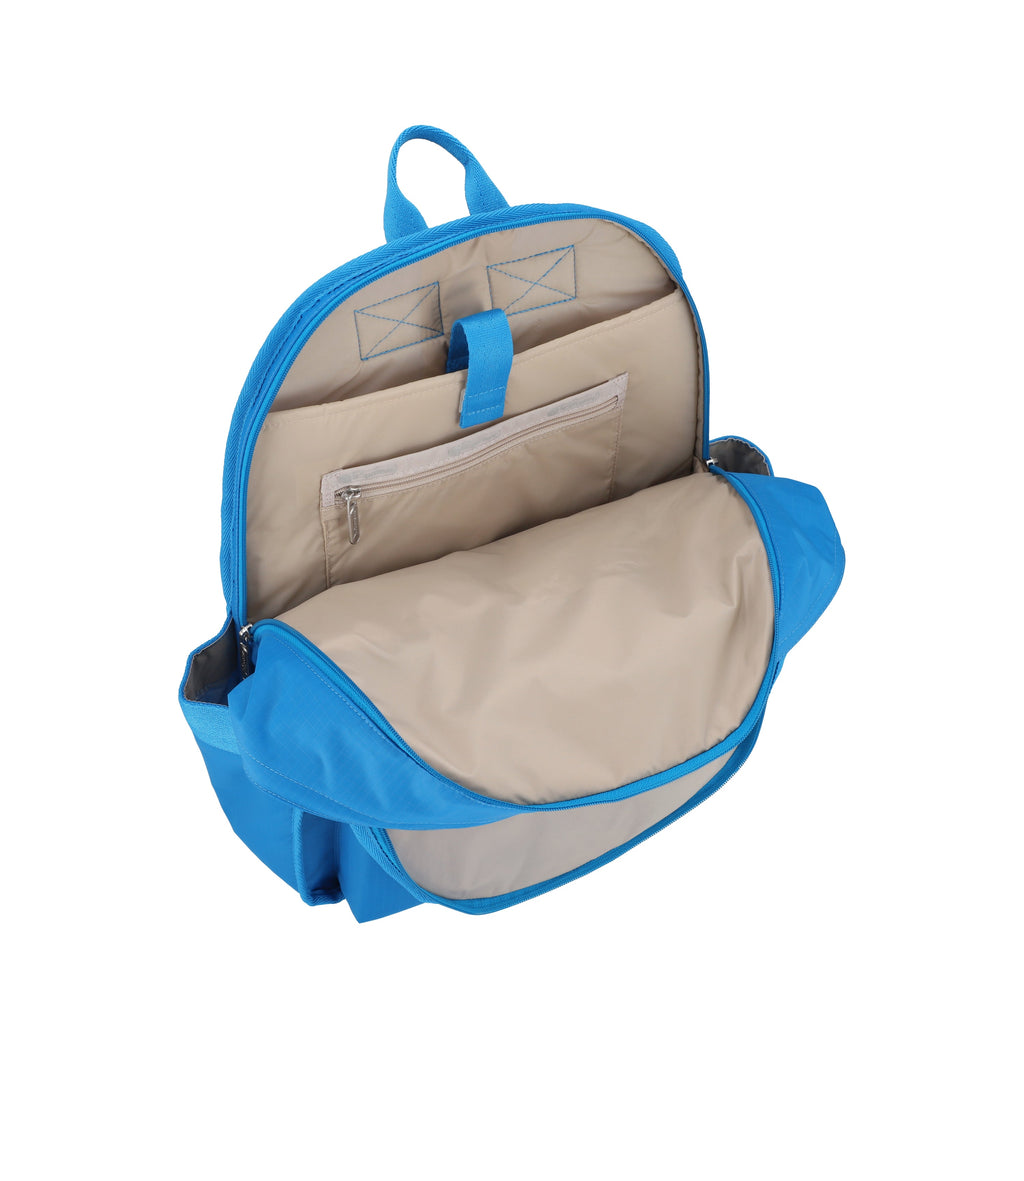 Route Backpack - 24737026015280